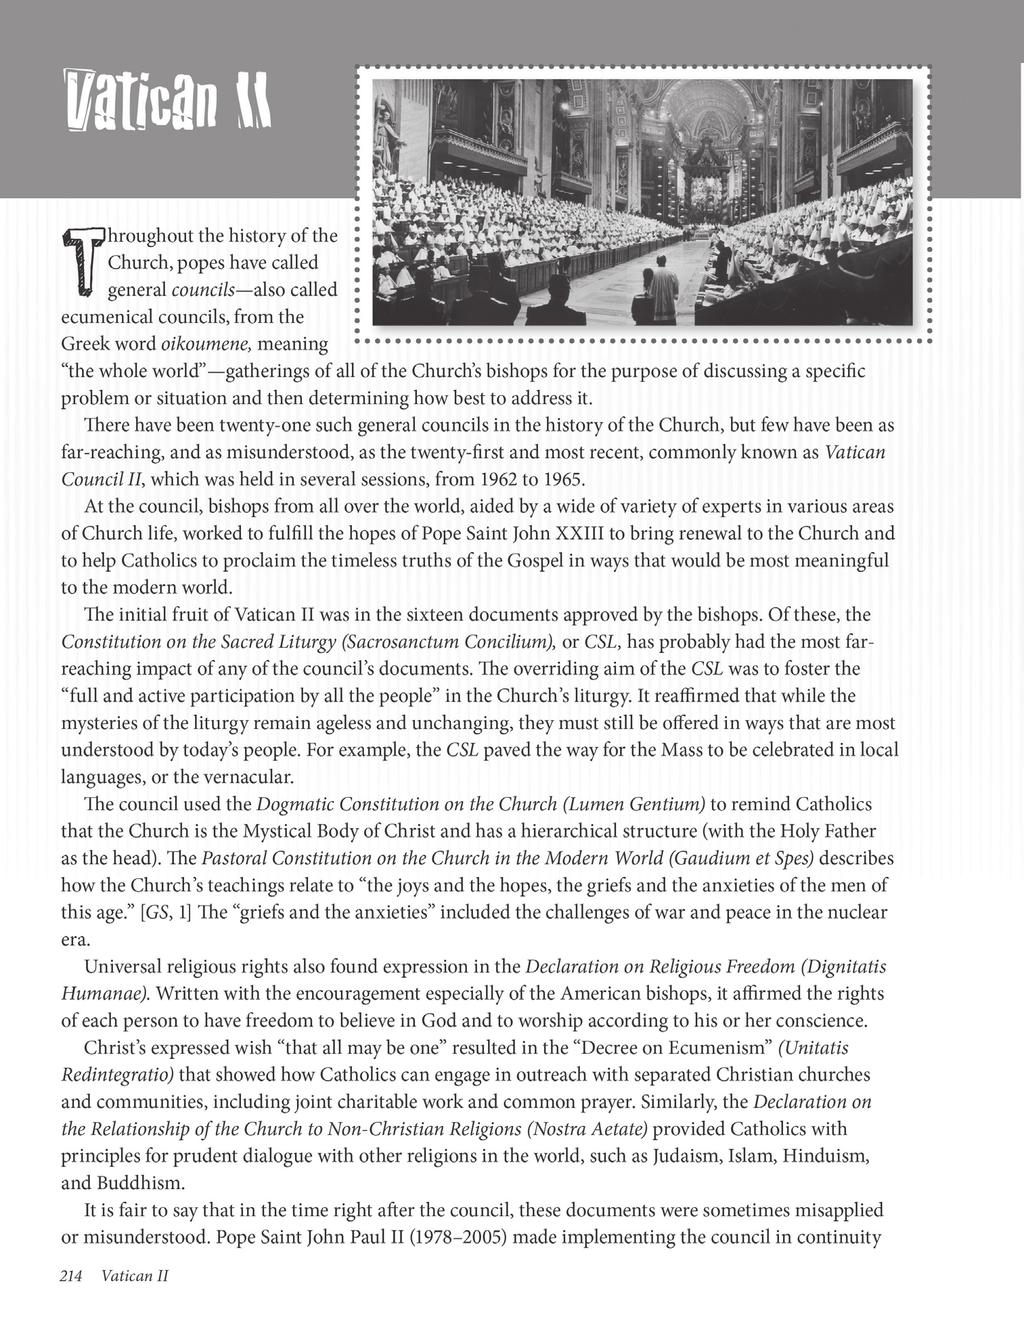 Vatican ii Read with the young people the text about Vatican II on pages 214 and 215.